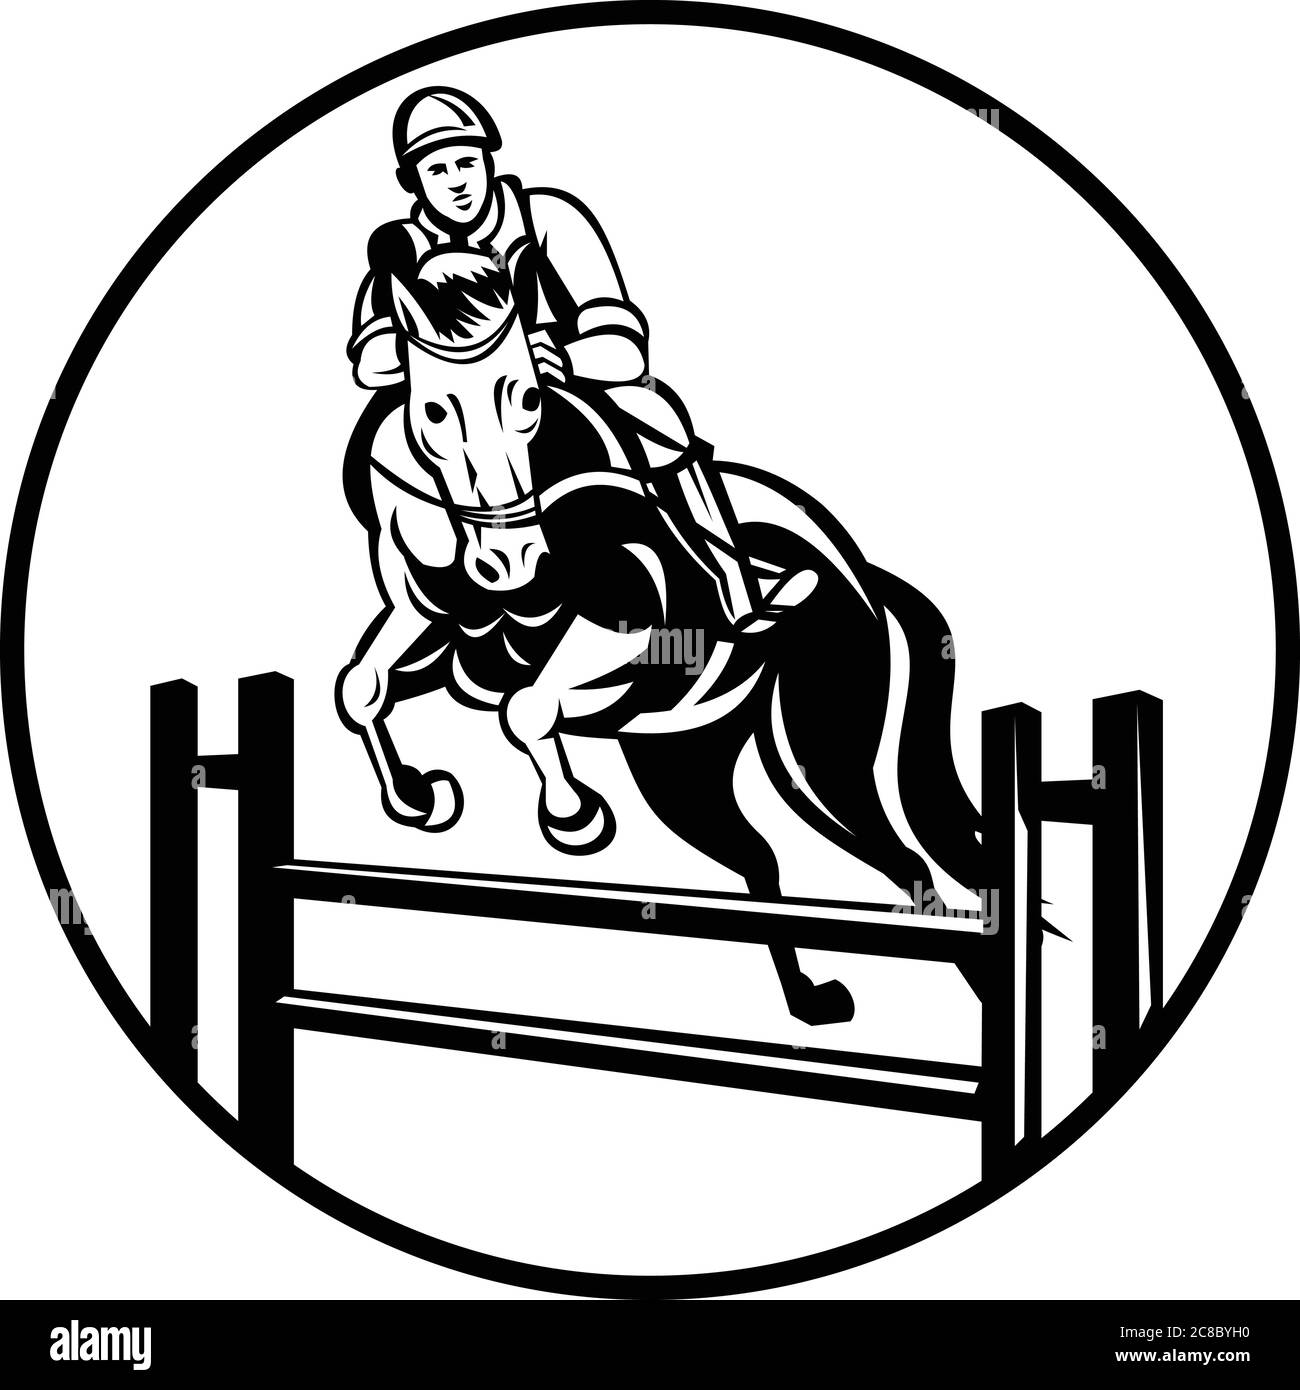 Retro style illustration of a rider on horse show jumping, stadium jumping or open jumping, an English riding equestrian event set in circle on isolat Stock Vector